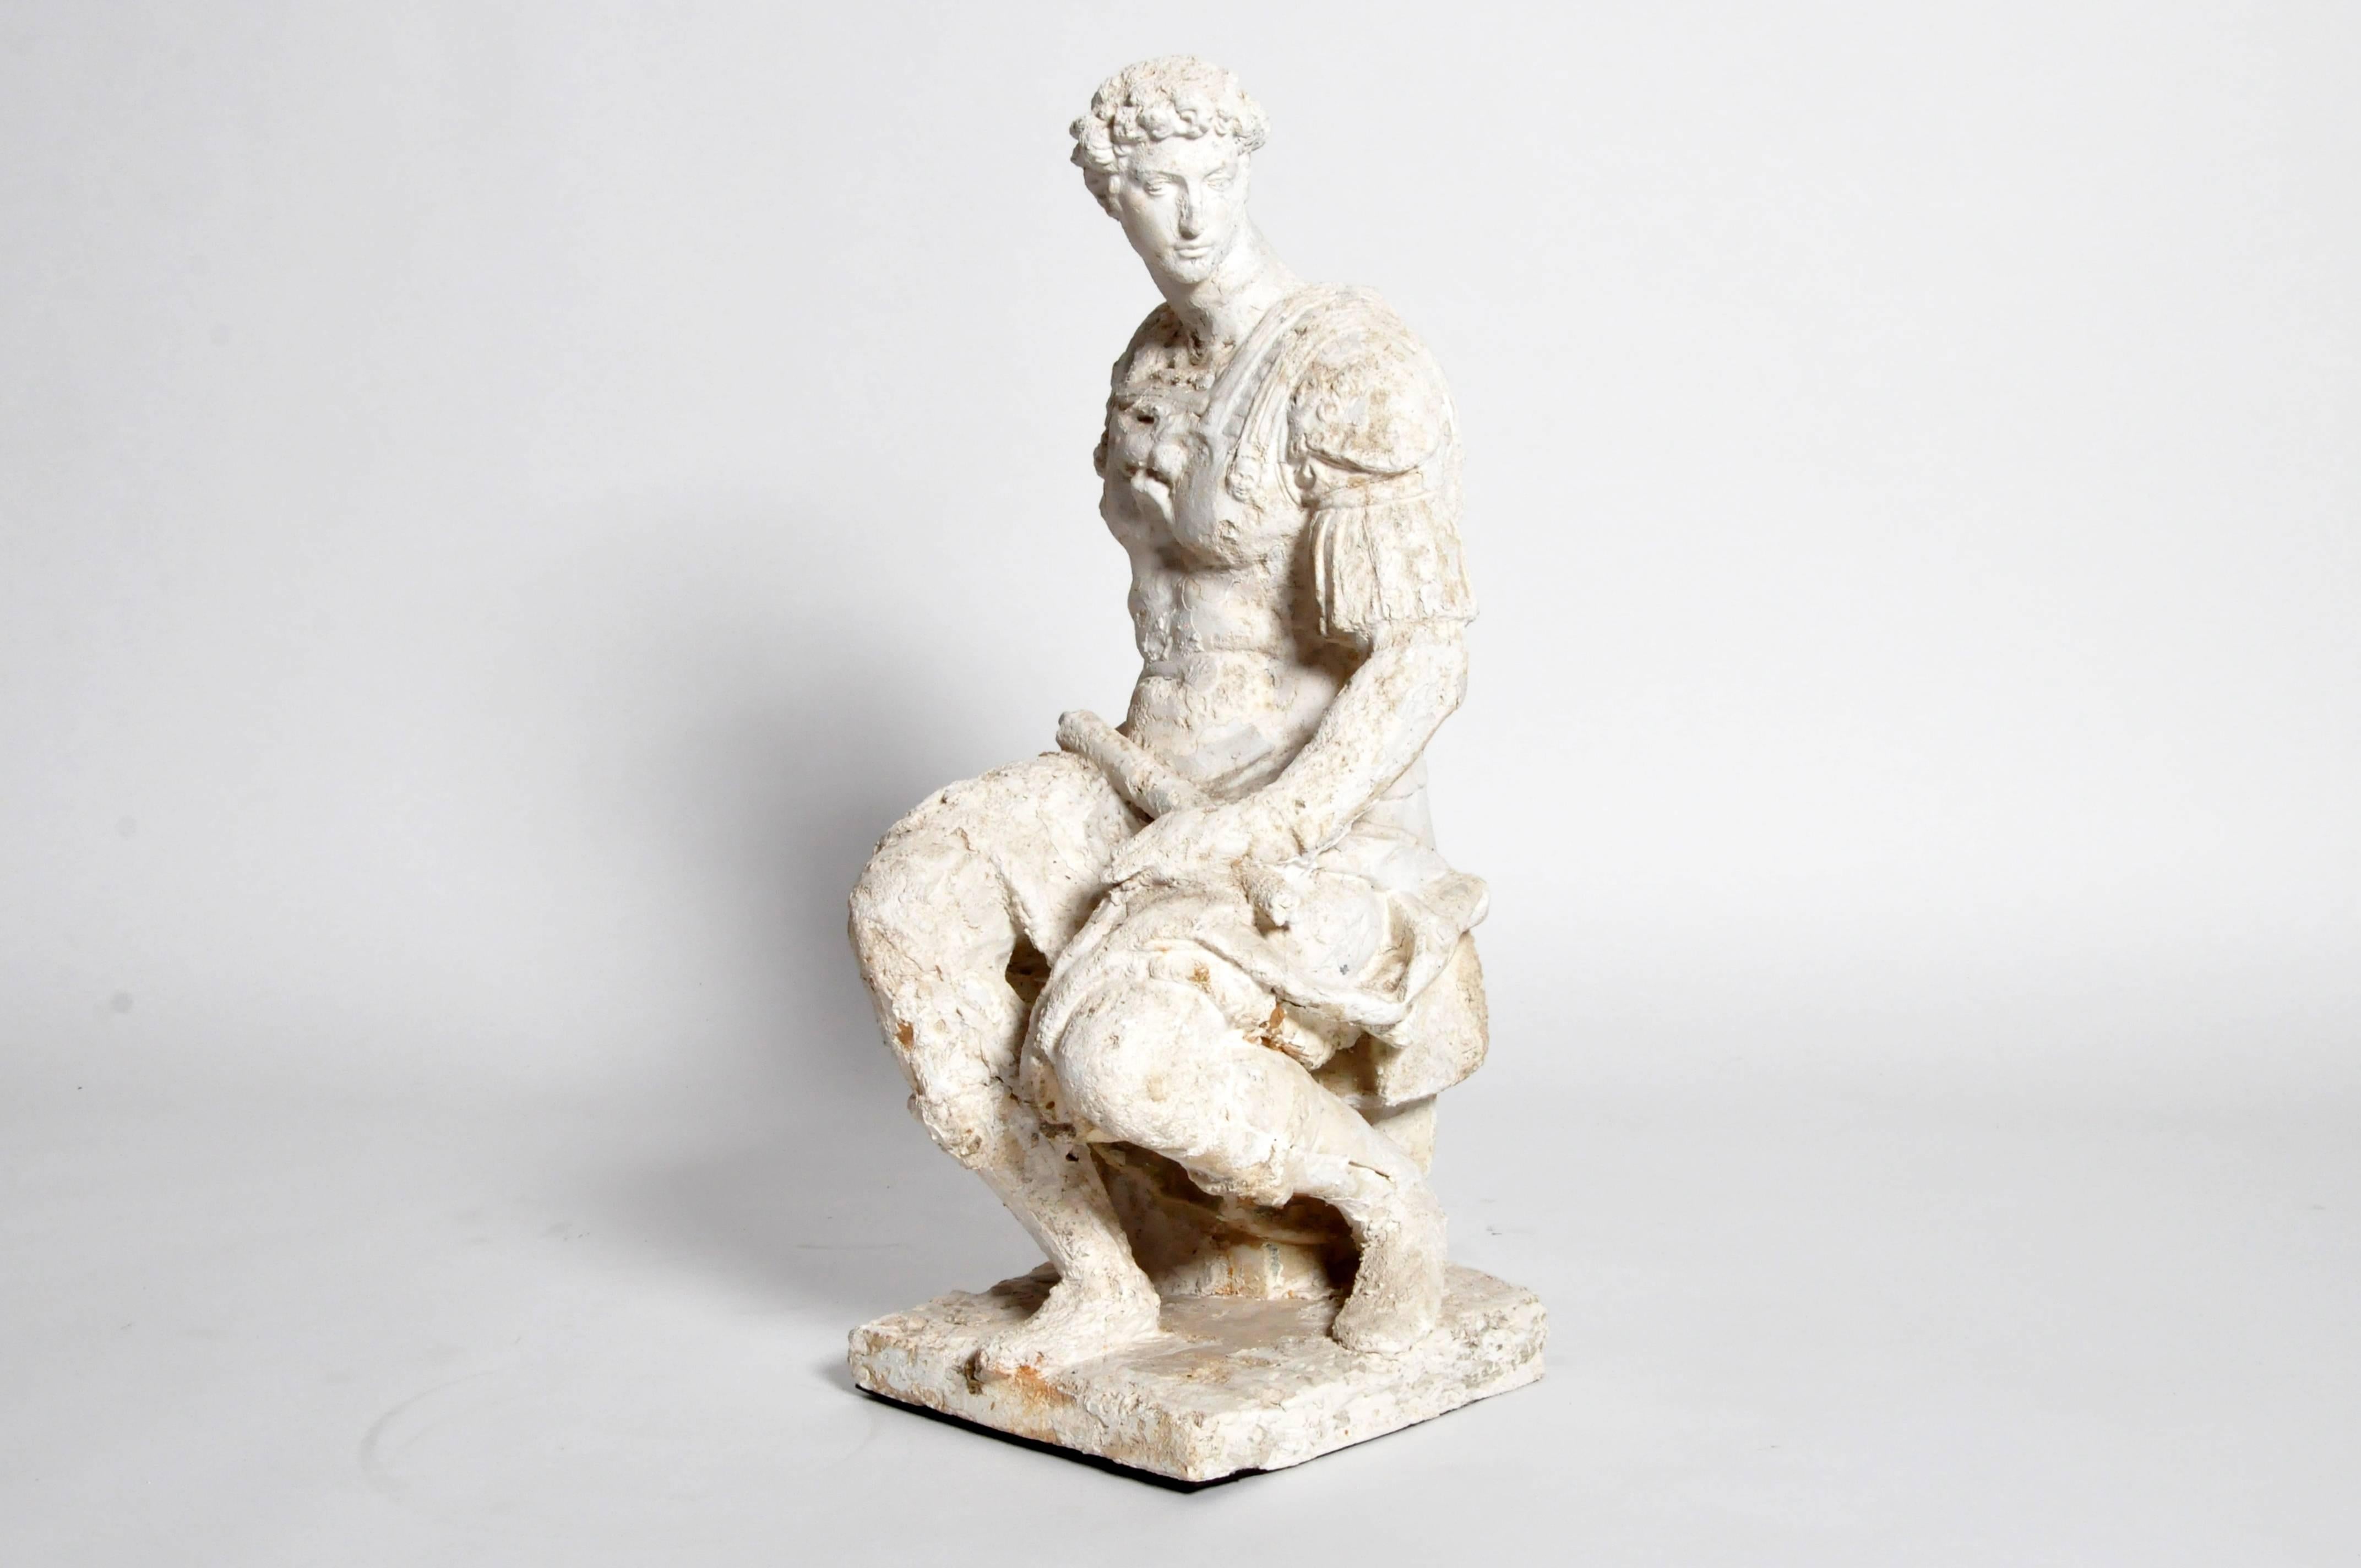 This impressive garden statue of a seated Roman soldier is from Paris, France and is made from plaster. Roman soldiers were part of the Roman army throughout the duration of Ancient Rome, from the Roman Kingdom (to c. 500 BC) to the Roman Republic